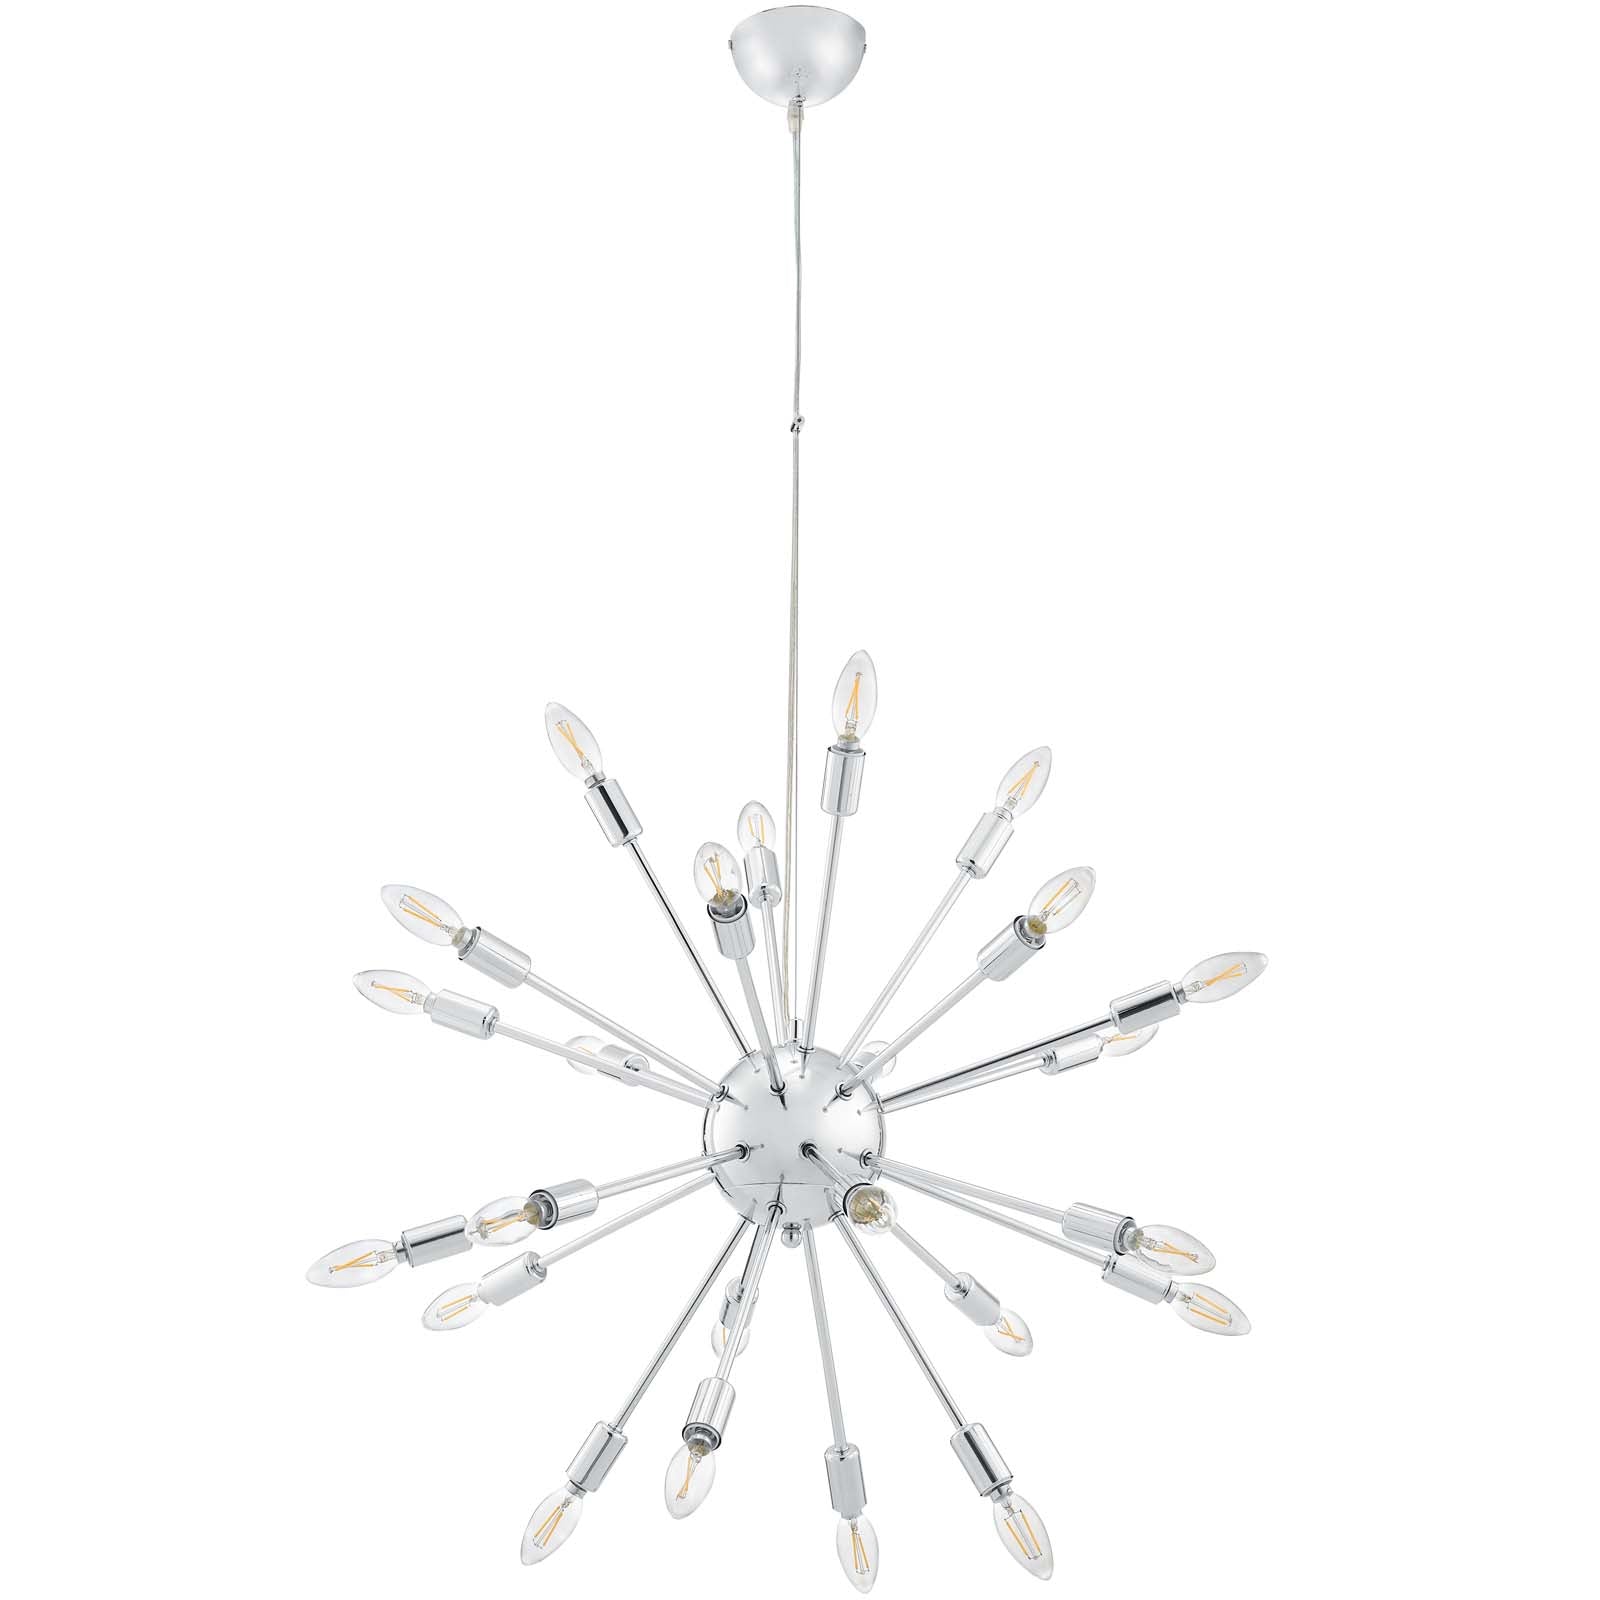 Mid-Century Silver Pendant Gamut Chandelier - 25W x 20 - Chrome Plated - Air-Powered